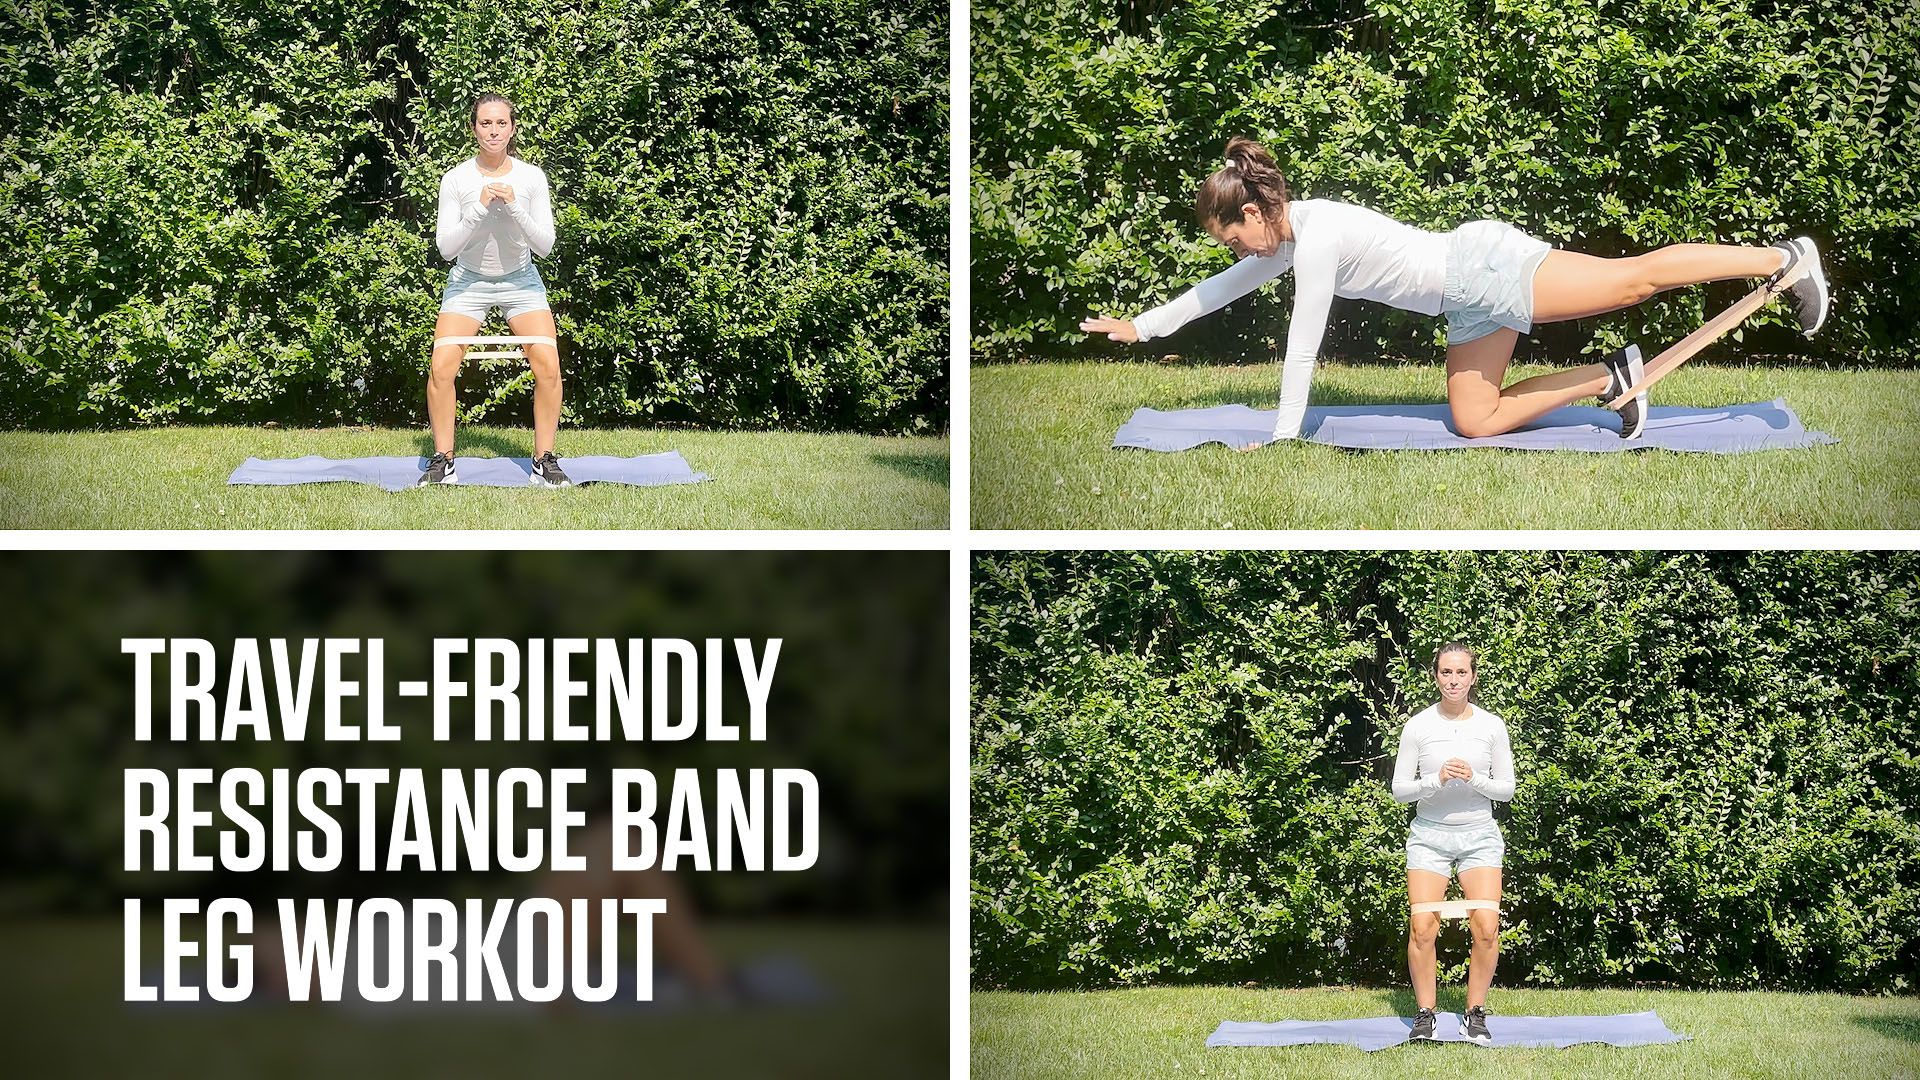 10 Best Resistance Band Exercises for Strong, Toned Legs